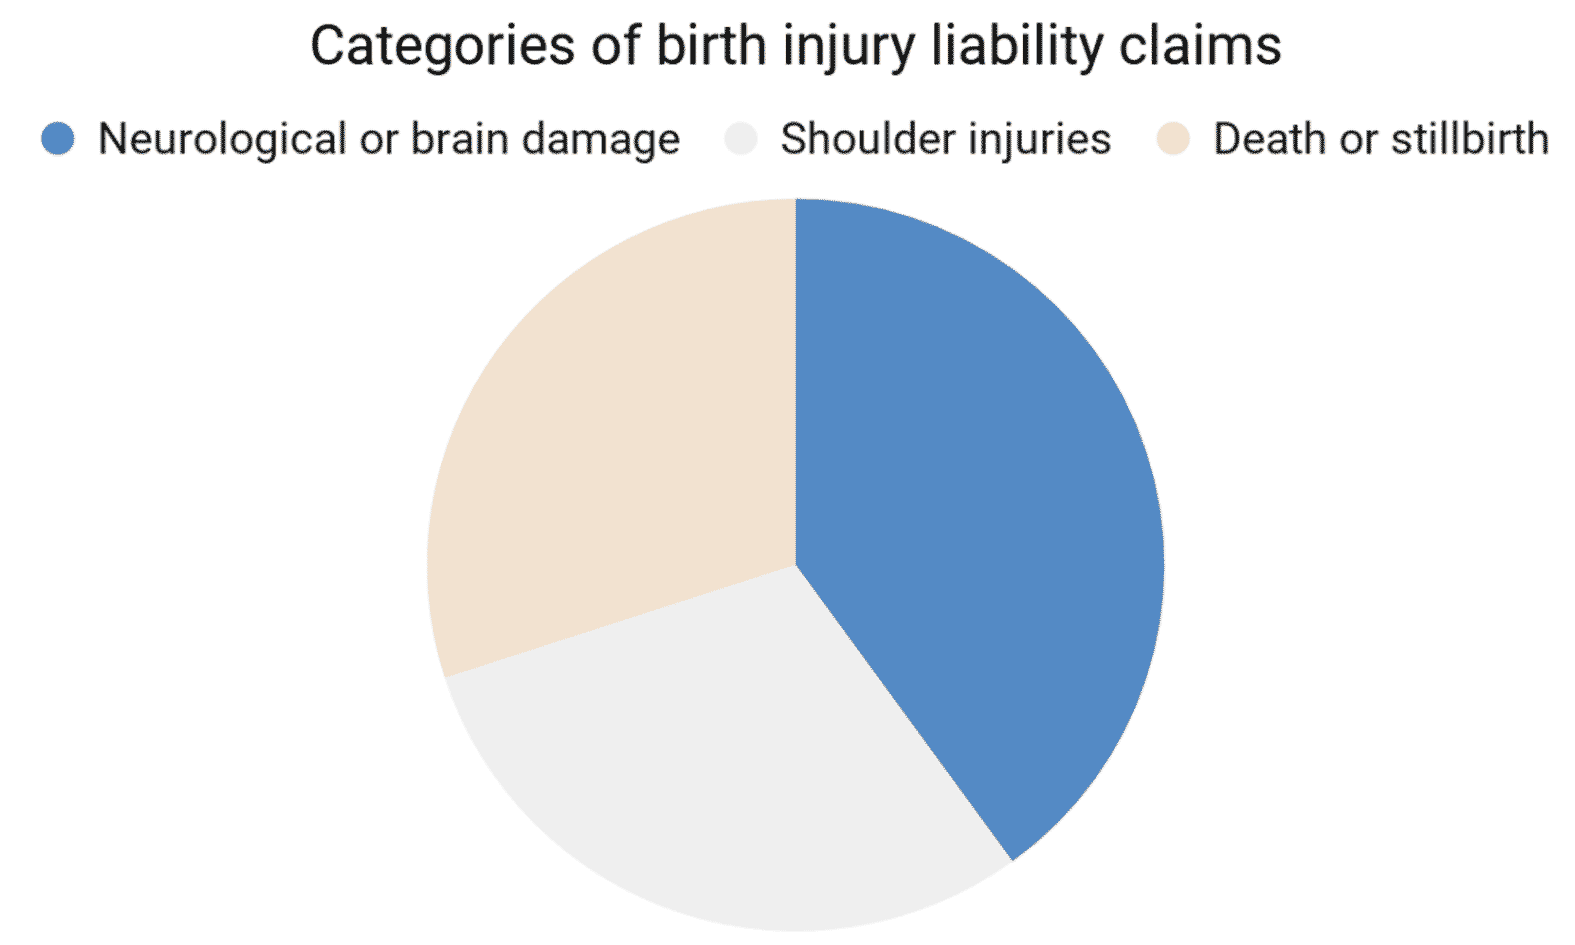 Categories of birth injury liability claims